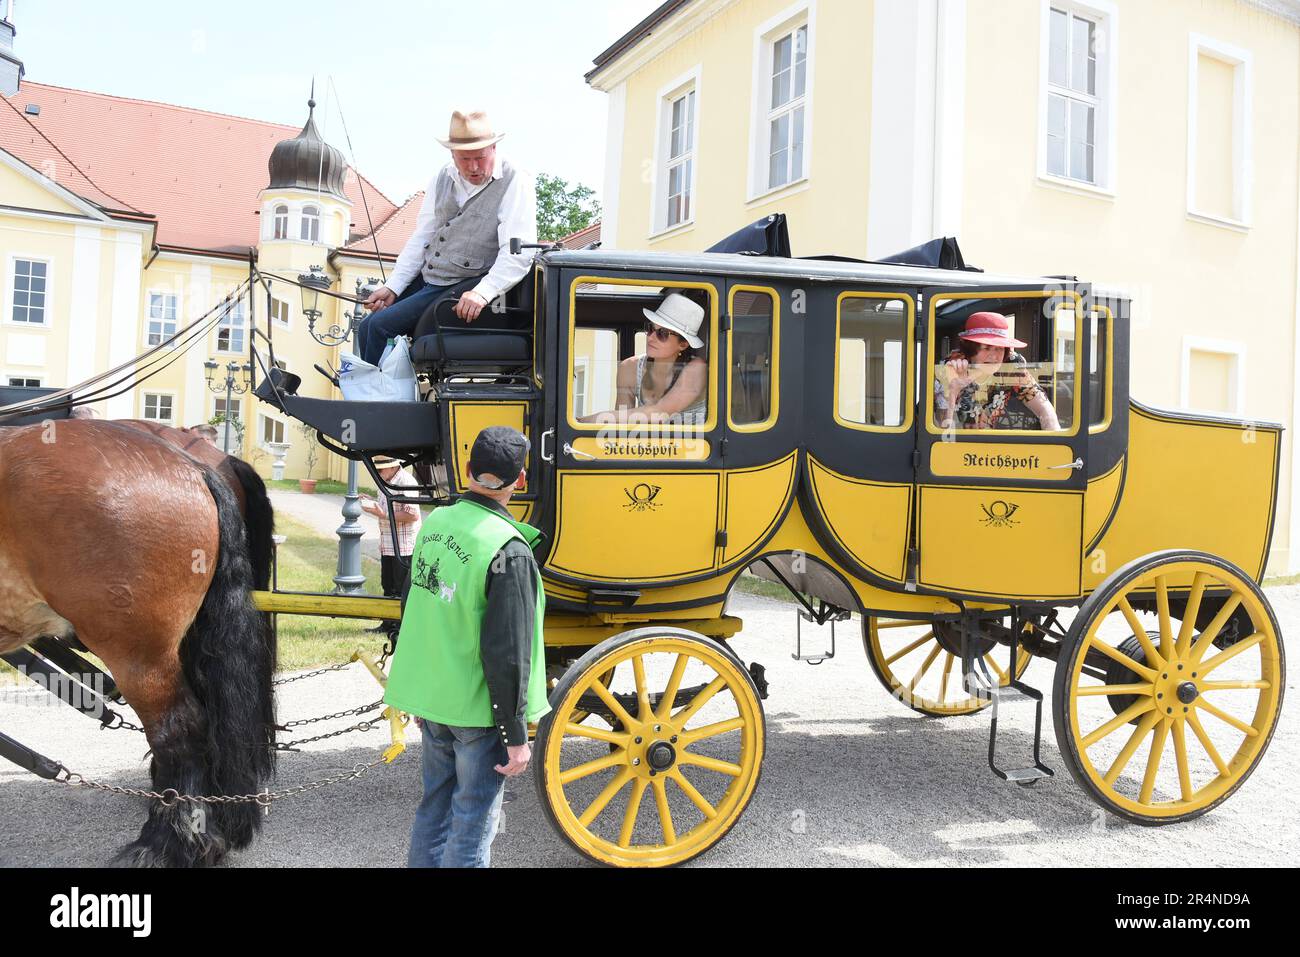 29 May 2023, Saxony, Hohenprießnitz, Bad Düben: Excursionists sit in a stagecoach from 1939 from the Kracht family business in the castle courtyard of the baroque castle Hohenprießnitz. Every year at Whitsun, friends and acquaintances meet with Siegfried Händler from the Bad Düben carriage driving service for a day trip with stagecoaches, Landauers, wagonettes and hunting carriages for a trip to the surrounding area in northern Saxony. Photo: Waltraud Grubitzsch/dpa Stock Photo